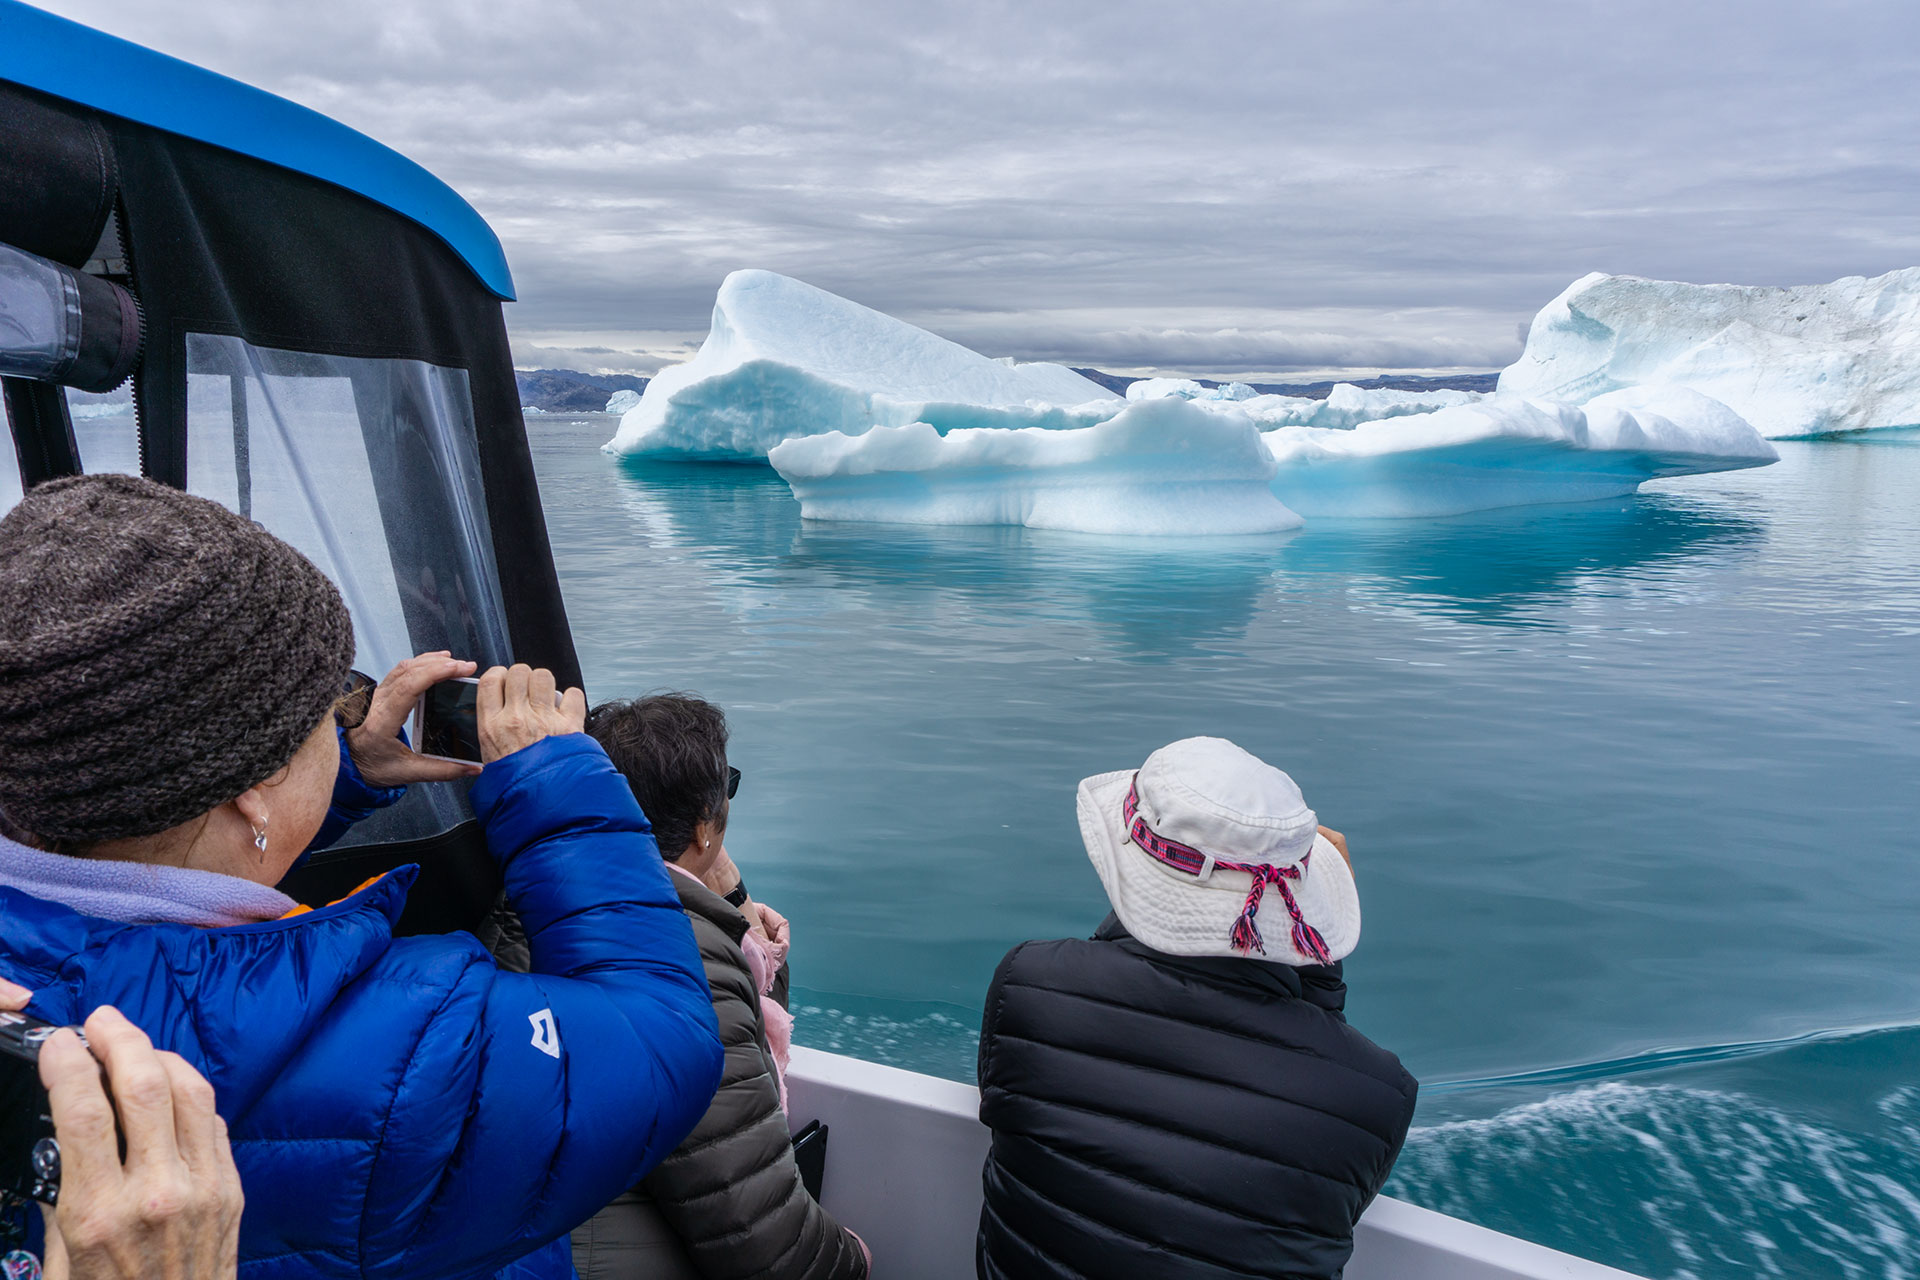 Photographing the iceberg spectacle